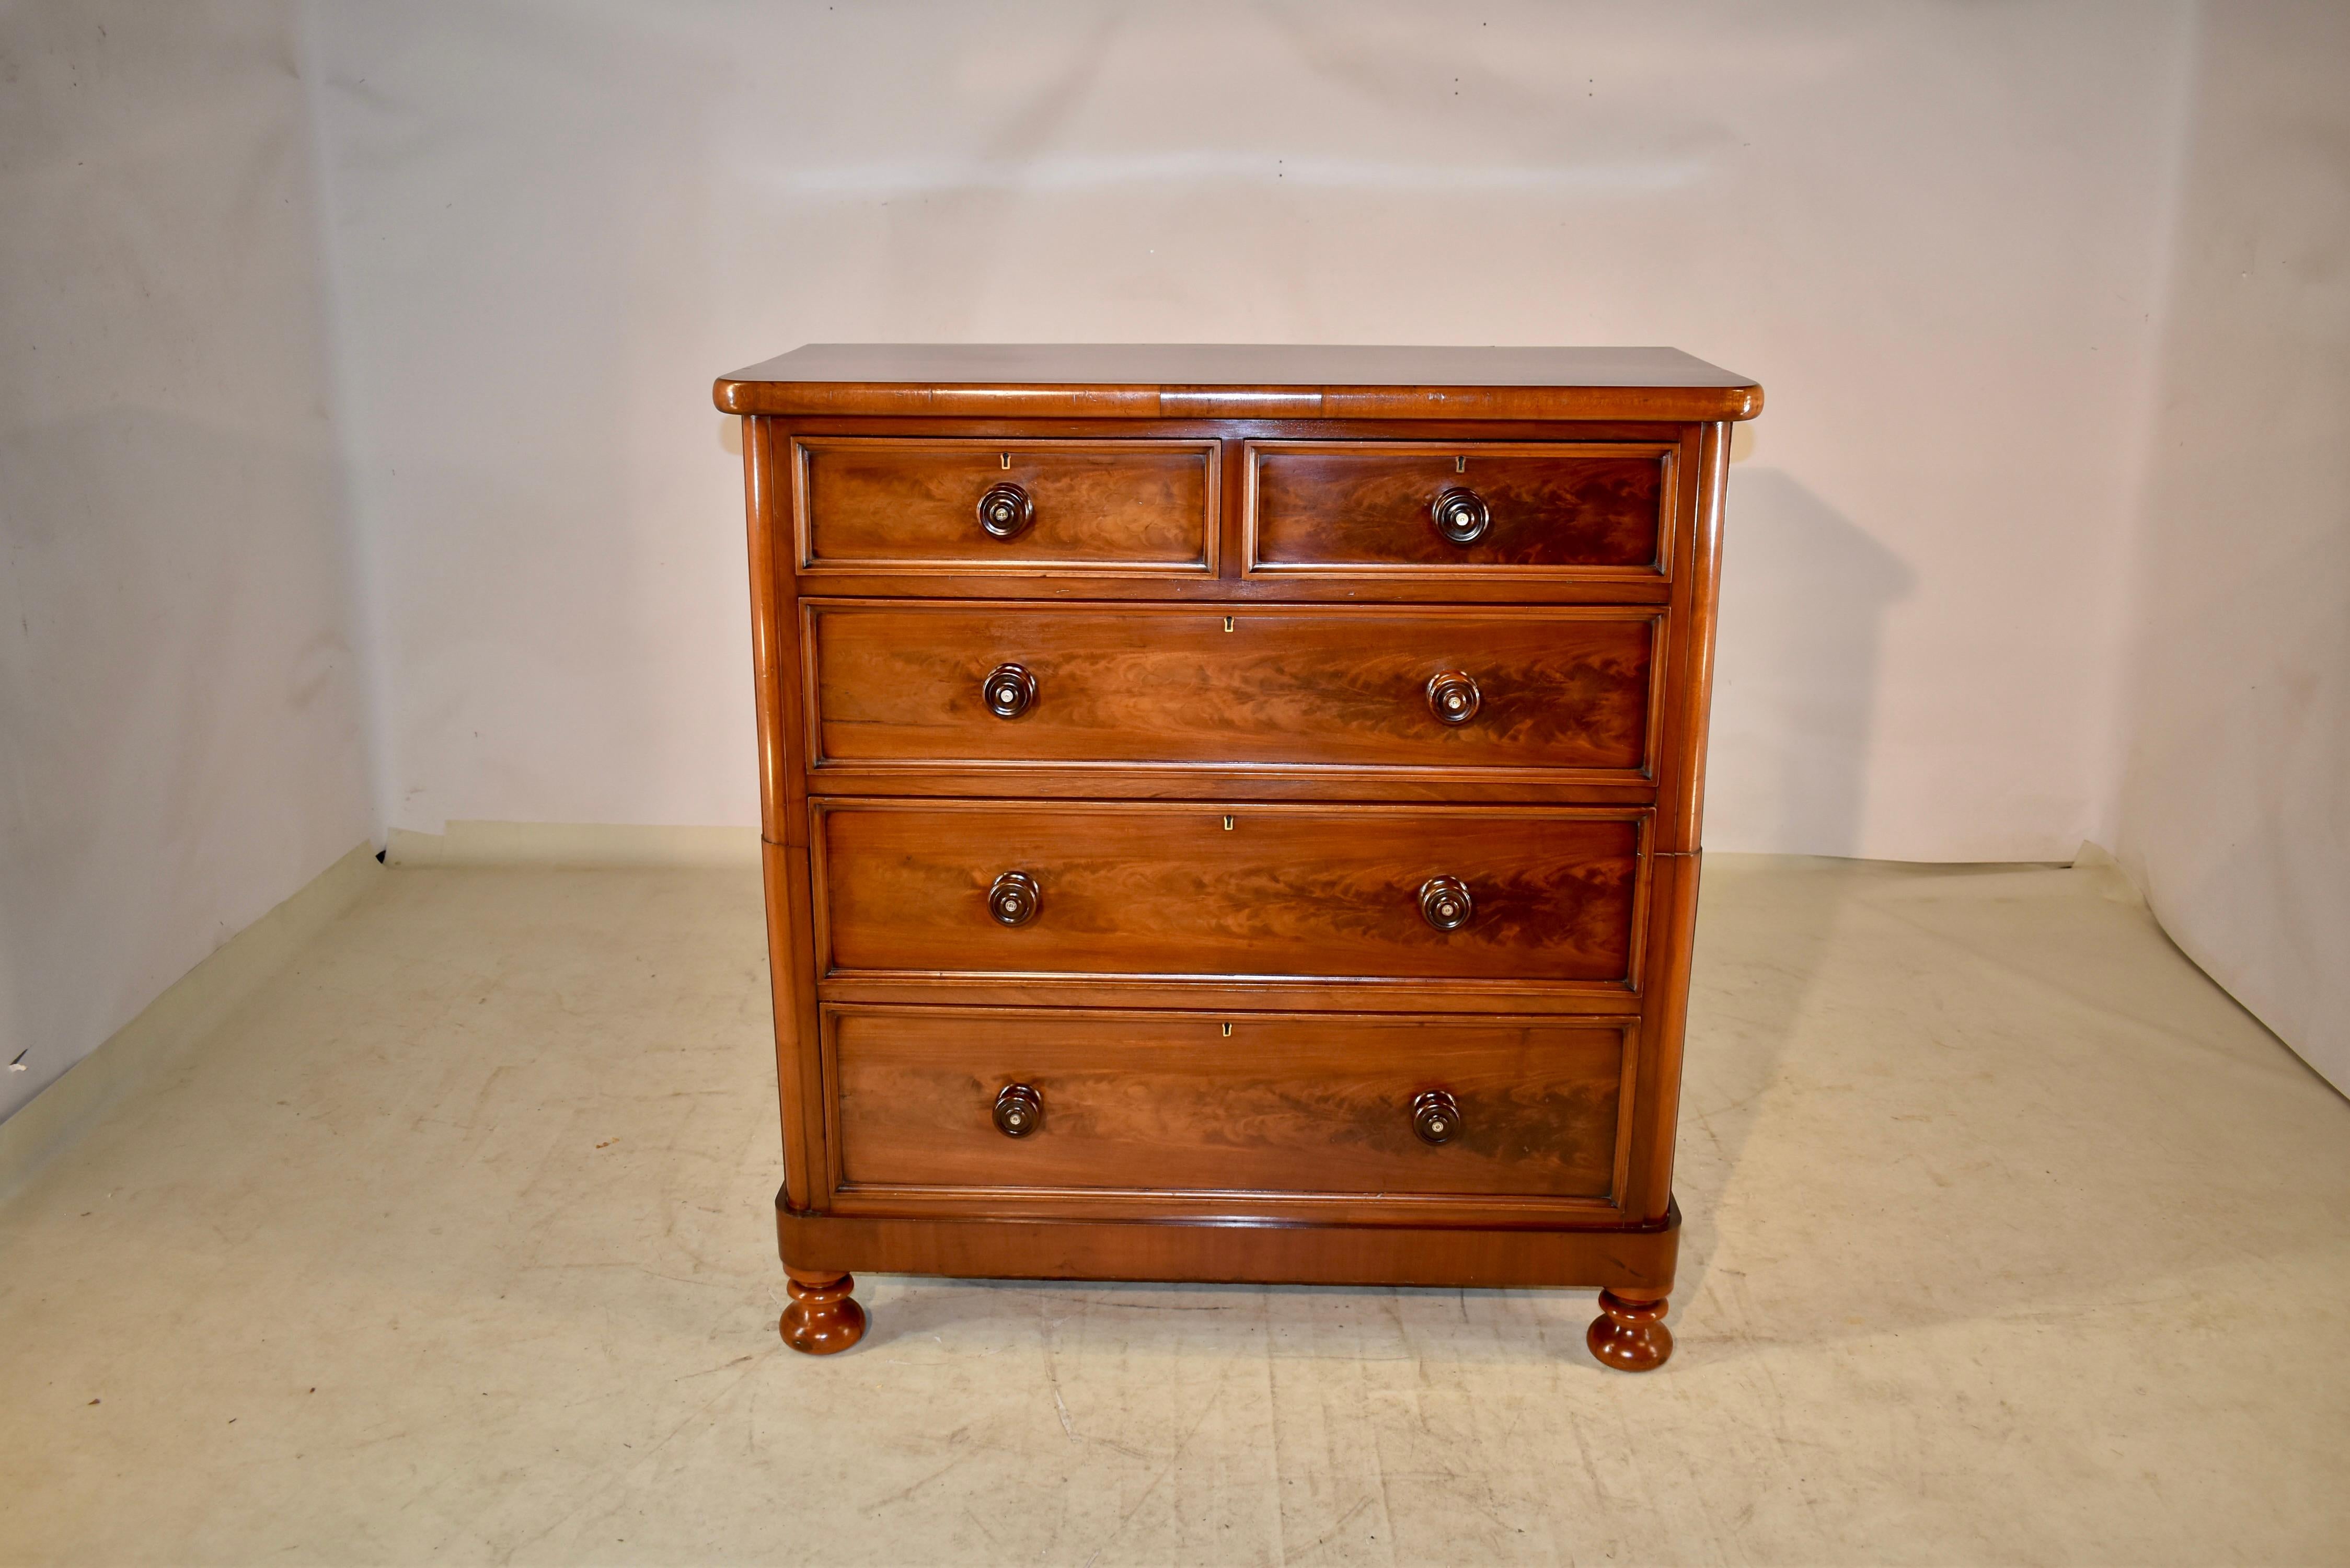 19th century mahogany chest of drawers from England with a wonderfully grained top with a simple banded edge, following down to simple sides. The case has two drawers over three drawers, all of which are beautifully flame grained and have molded